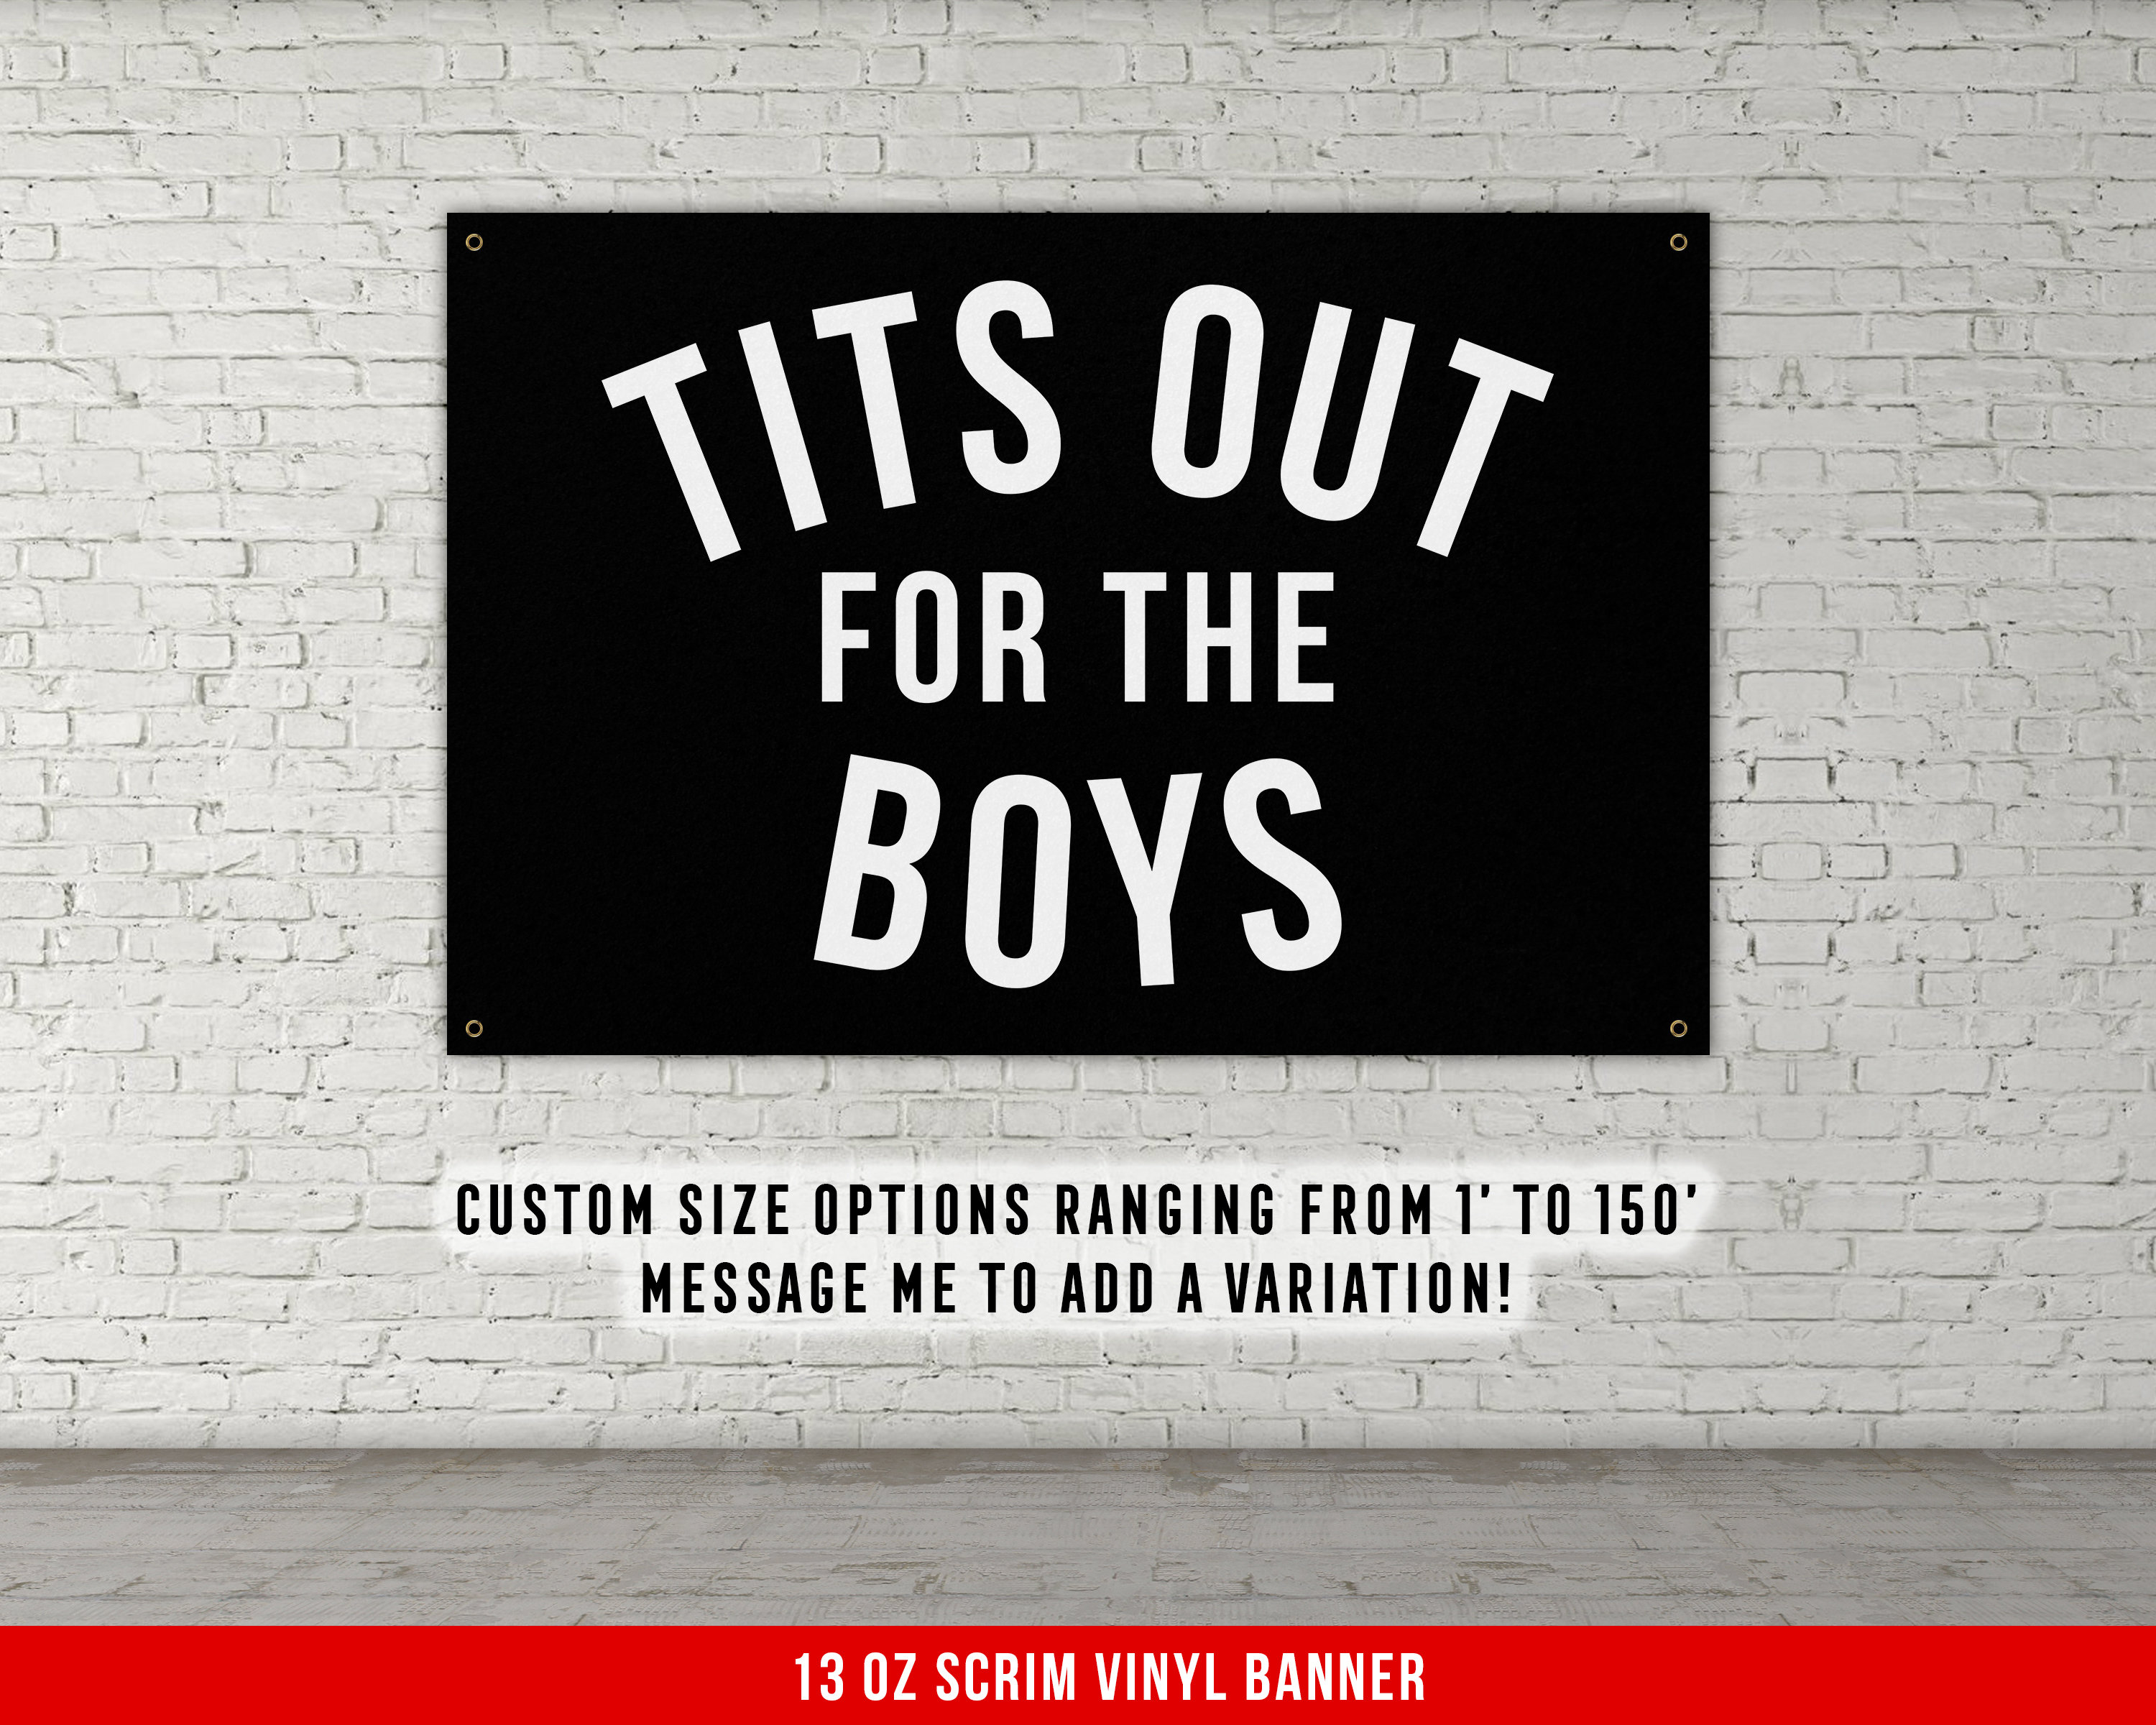 bharti bakshi recommends tits out for the lads pic